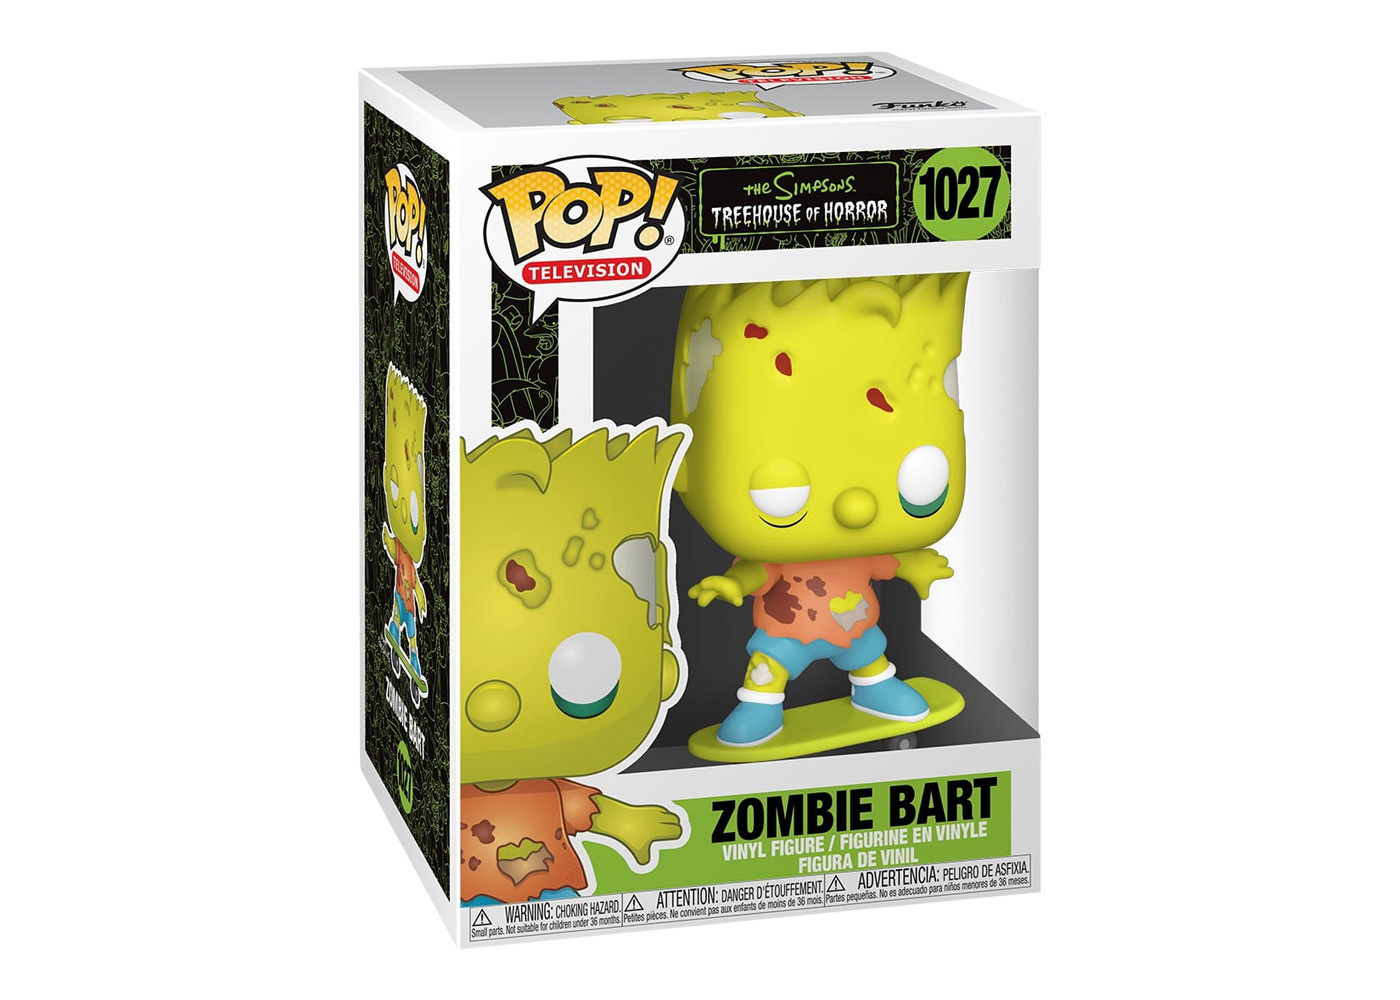 Funko Pop! Television The Simpsons Treehouse of Horror Zombie Bart 